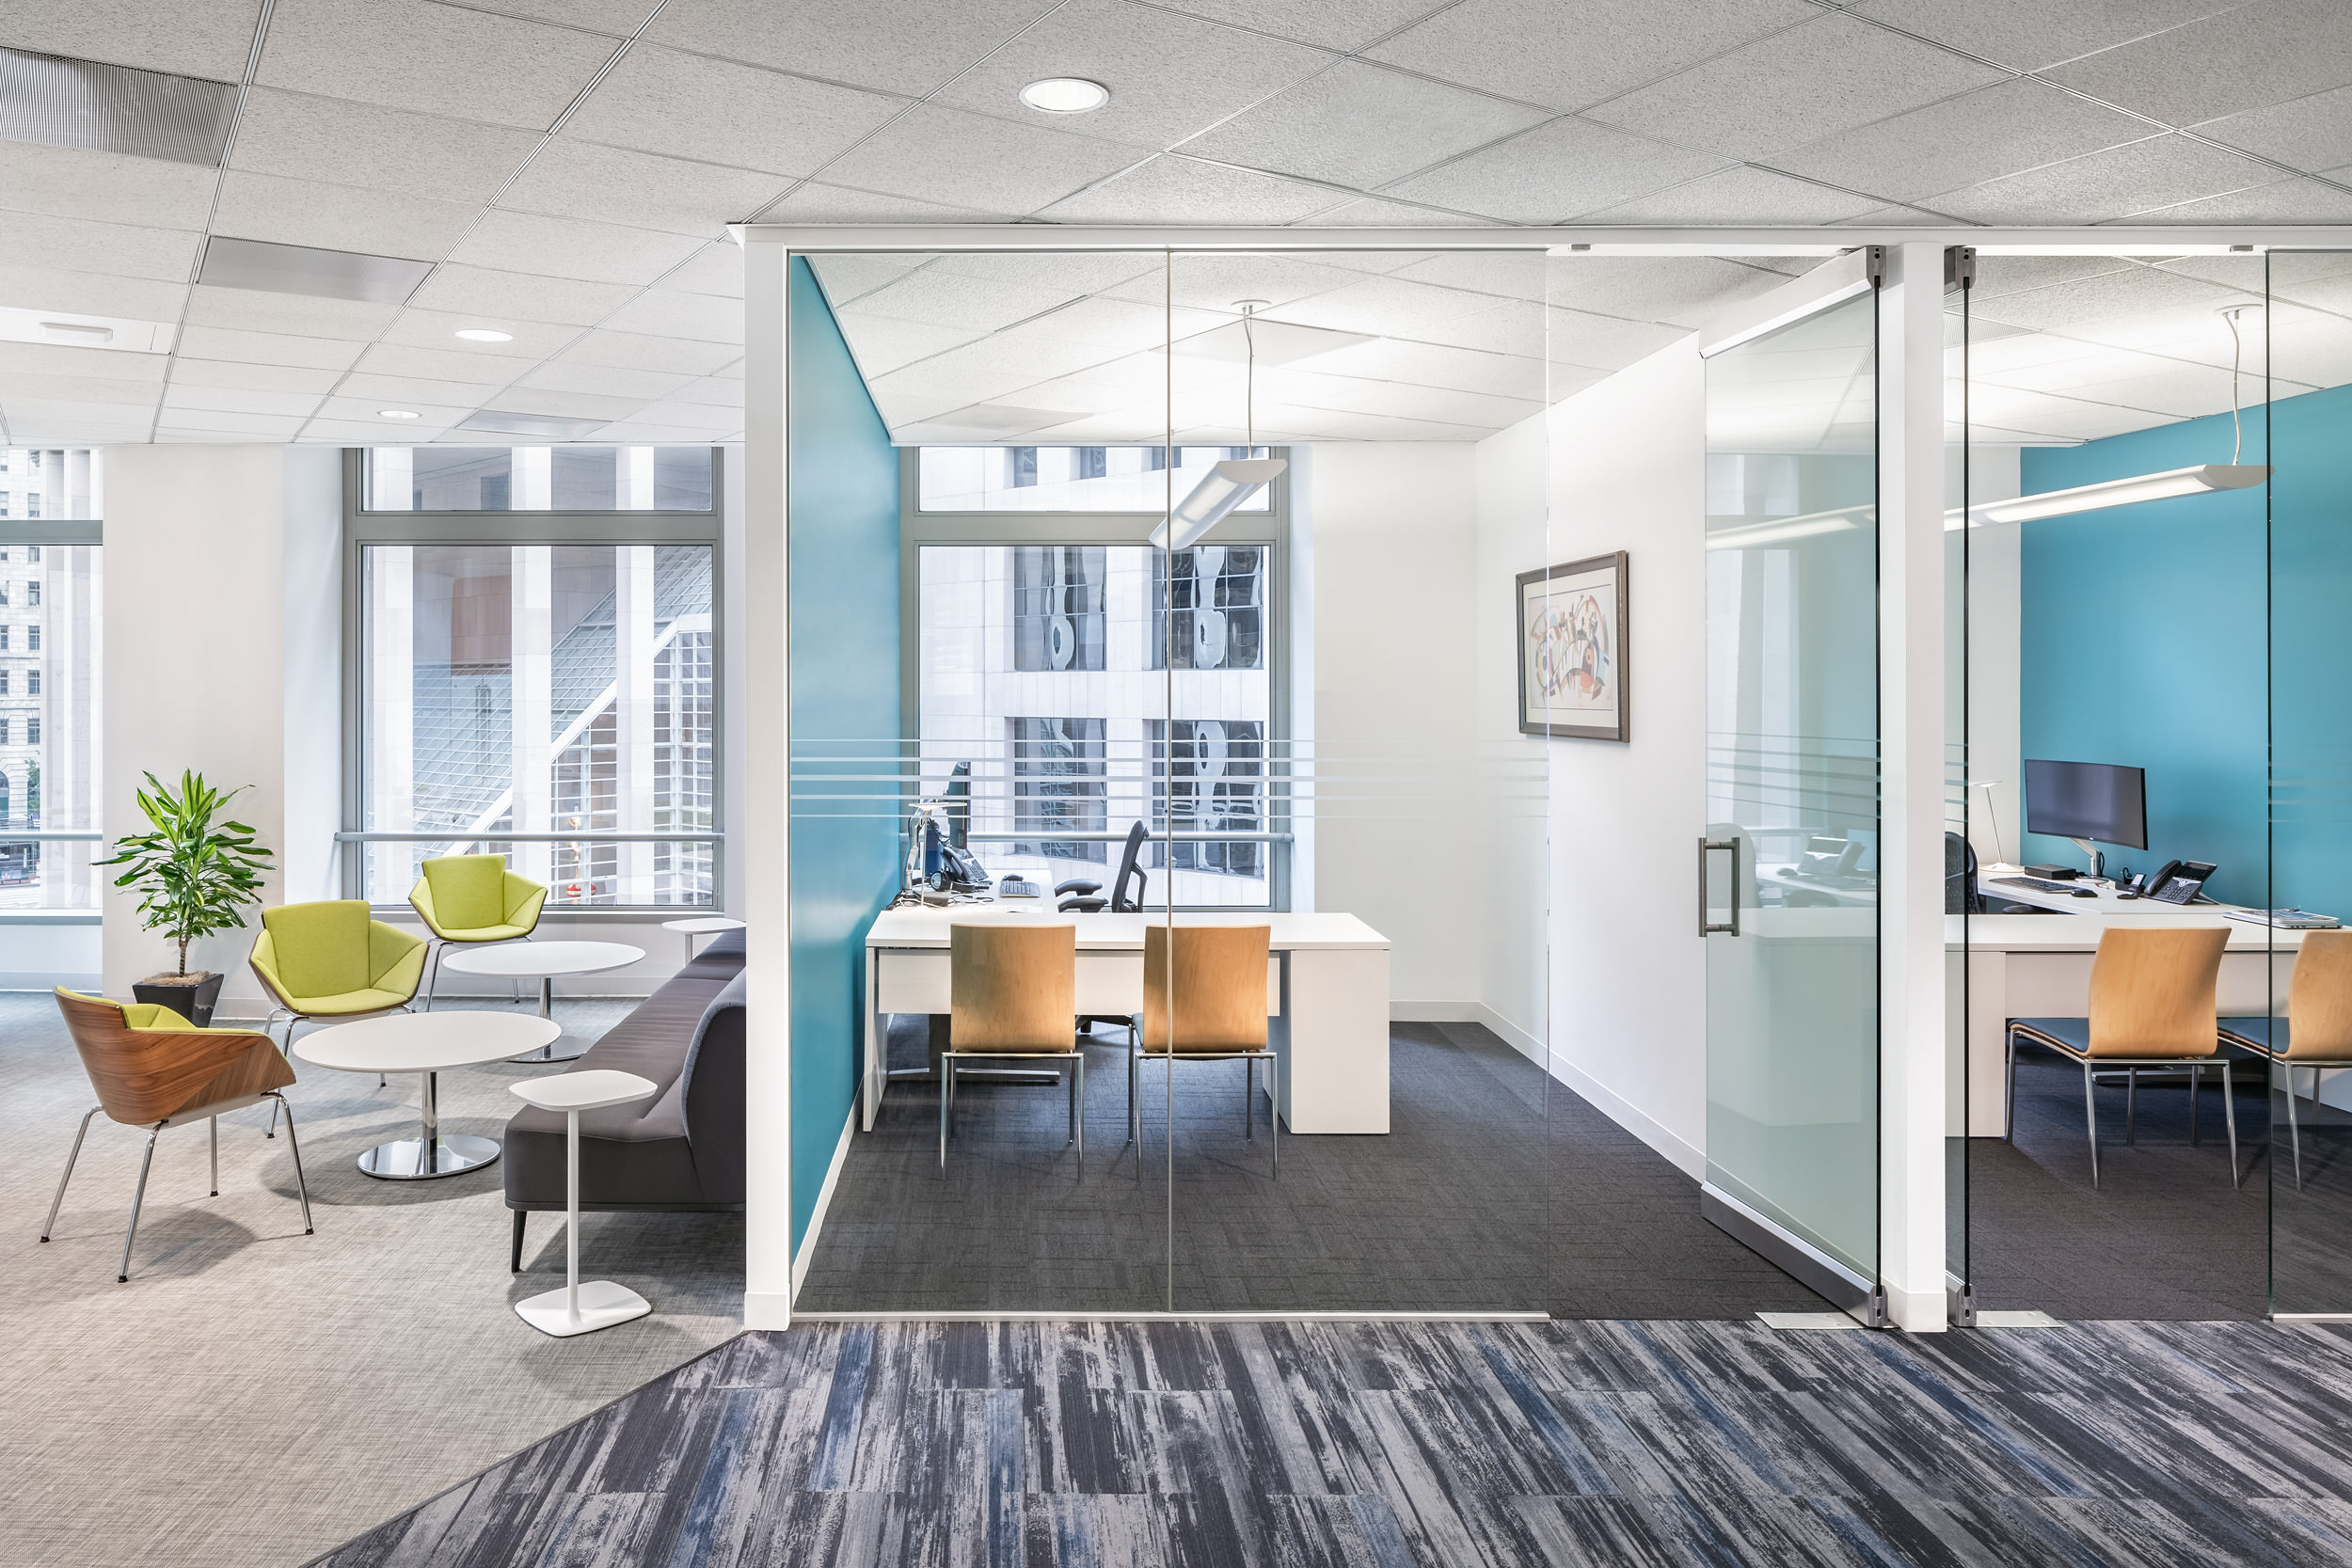 Tenant Improvement for CBRE Property Management Division Featured on Office Snapshots